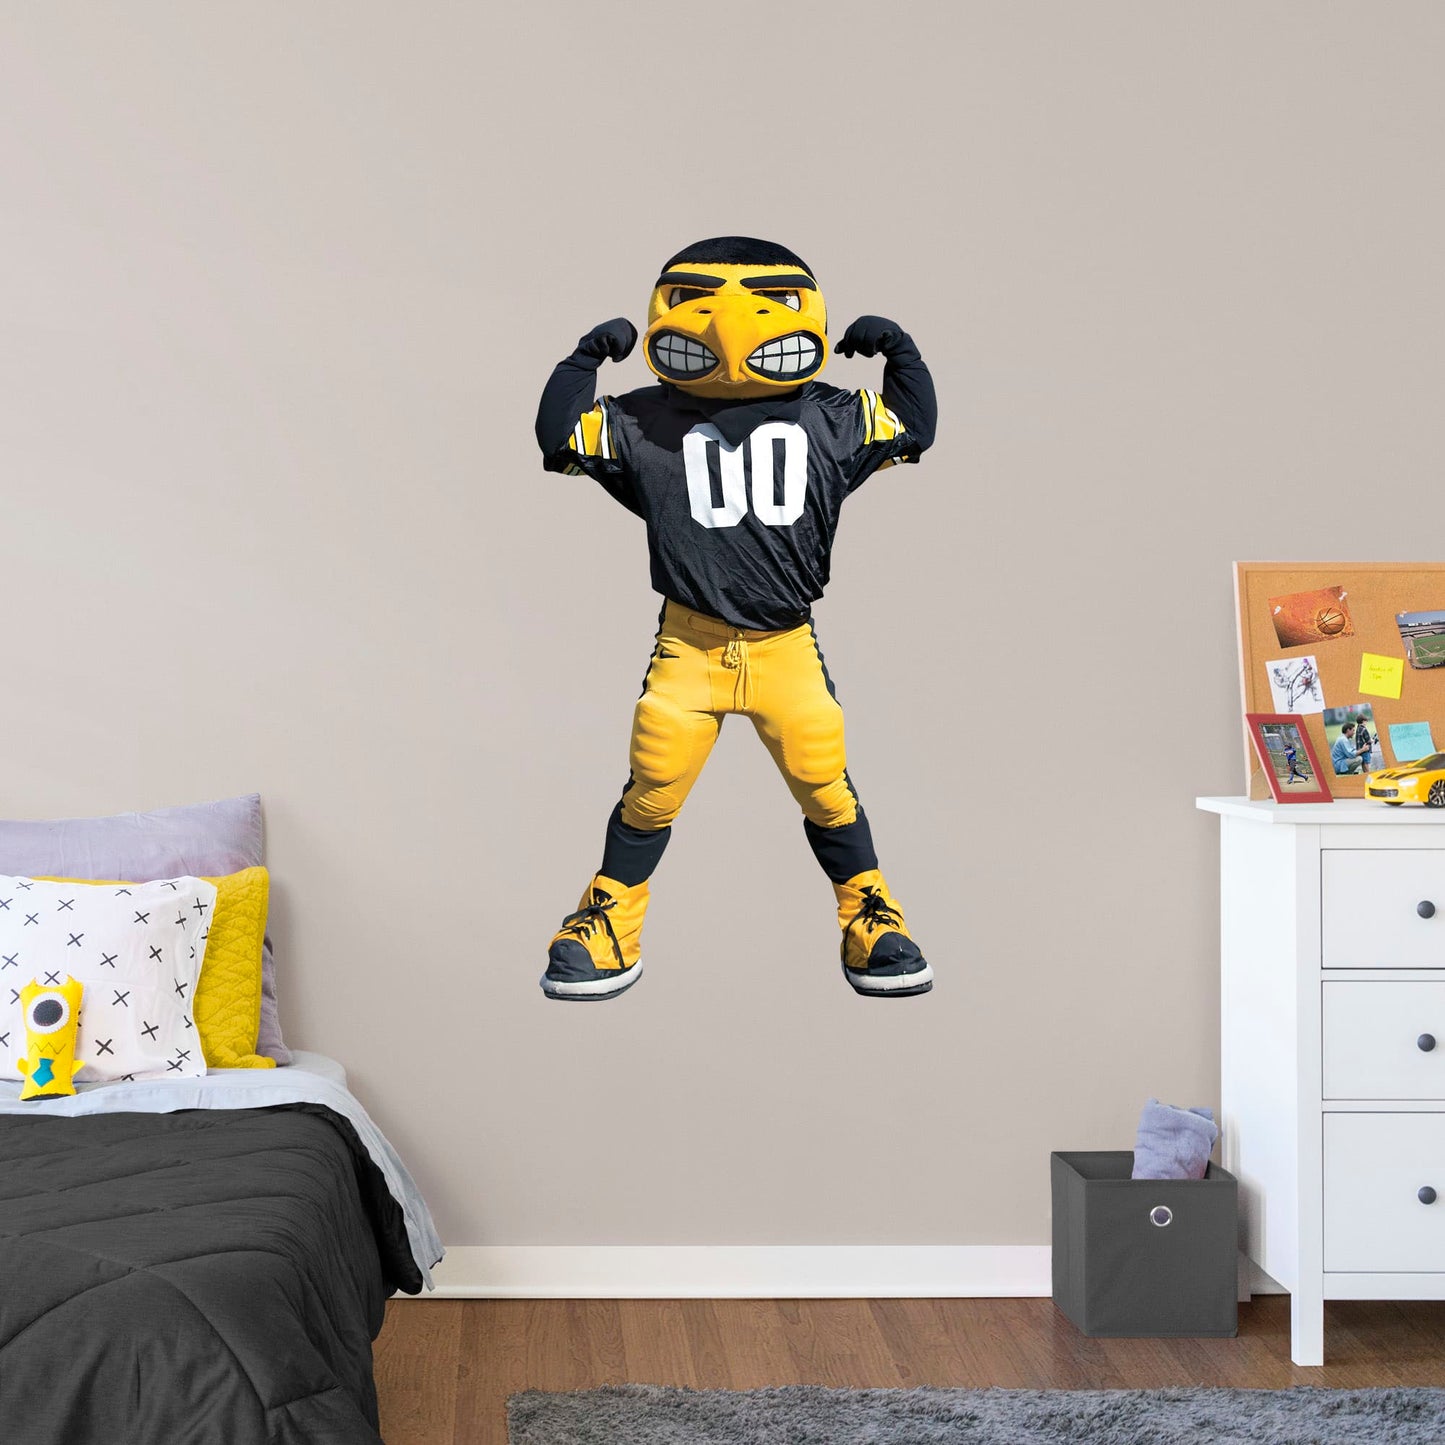 Large Character + 1 Decal (9"W x 17"H)